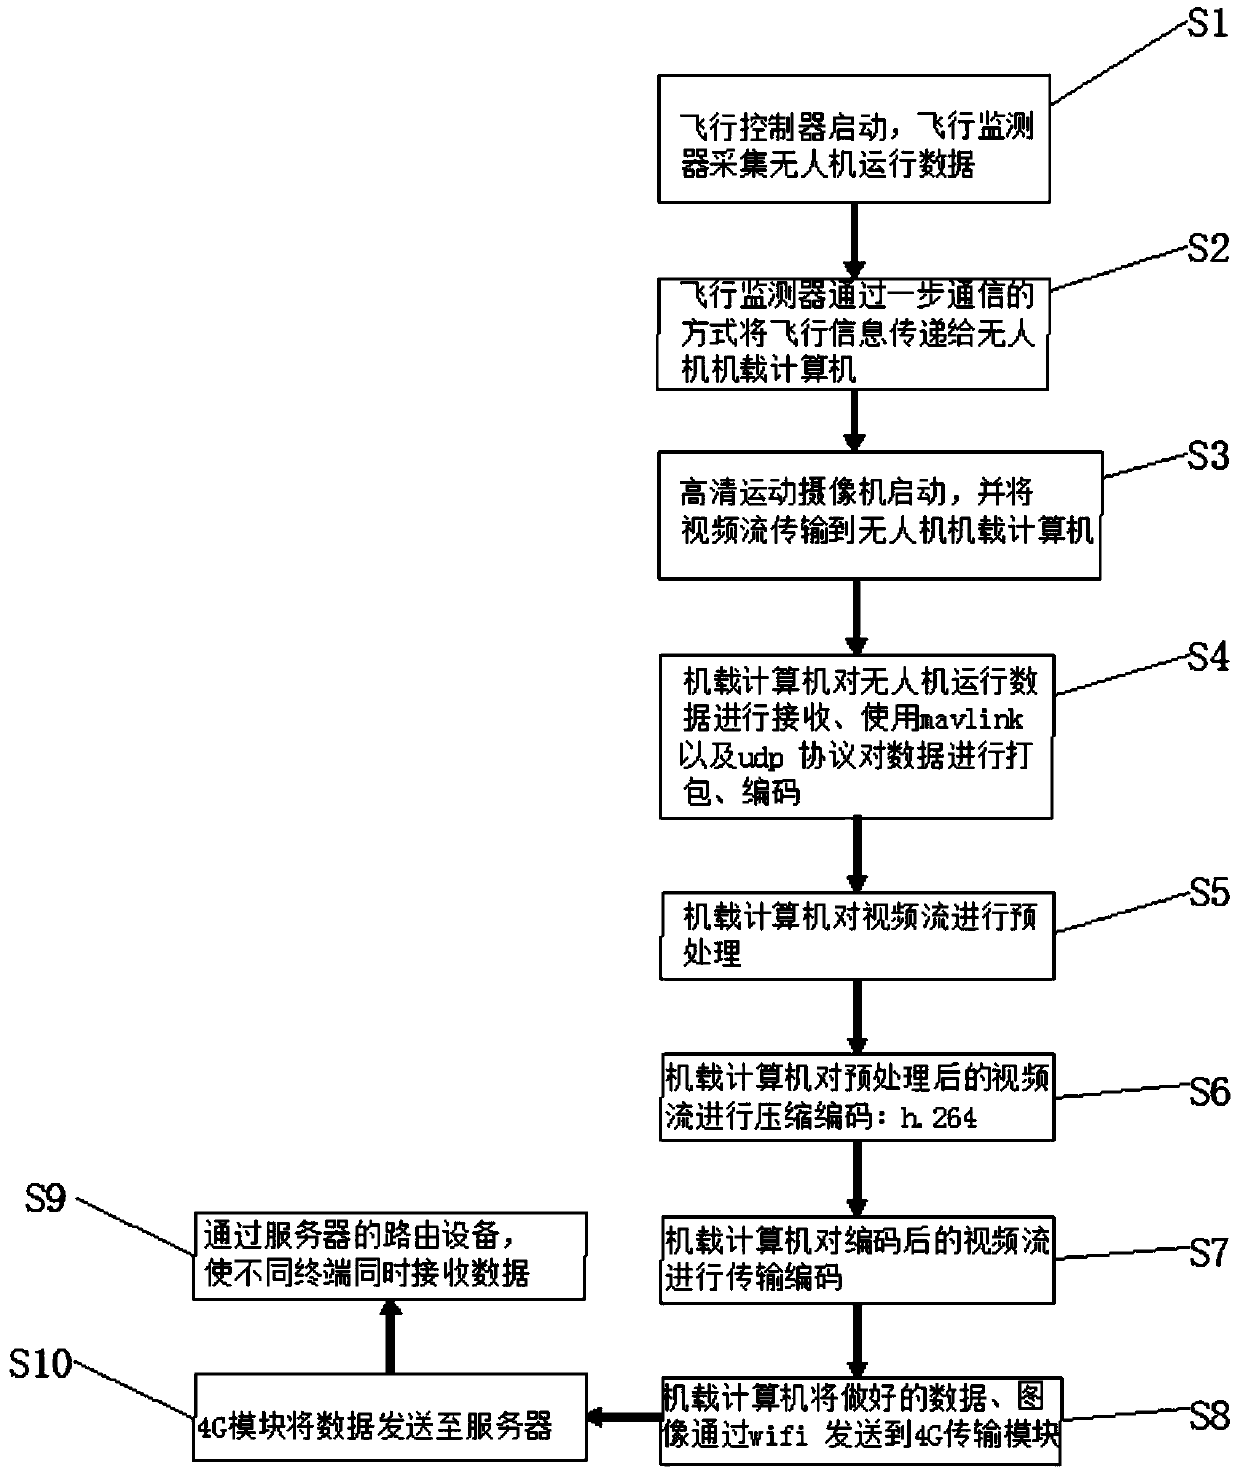 Unmanned aerial vehicle image and video transmission and distribution system and method based on 4G network